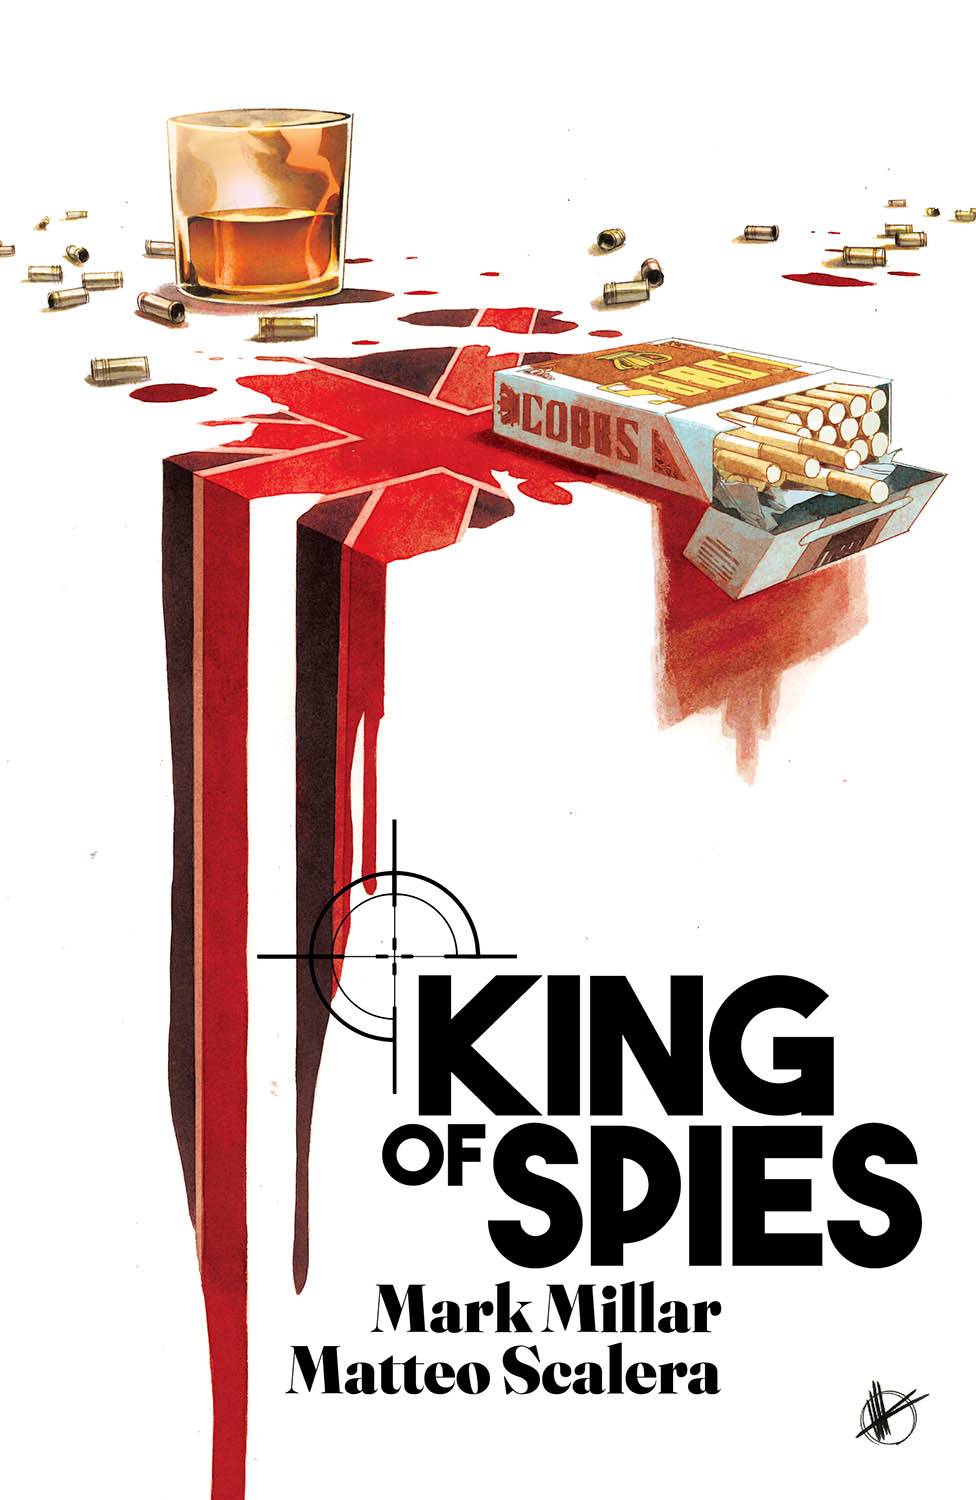 KING OF SPIES TP (MAR220093) (MR)